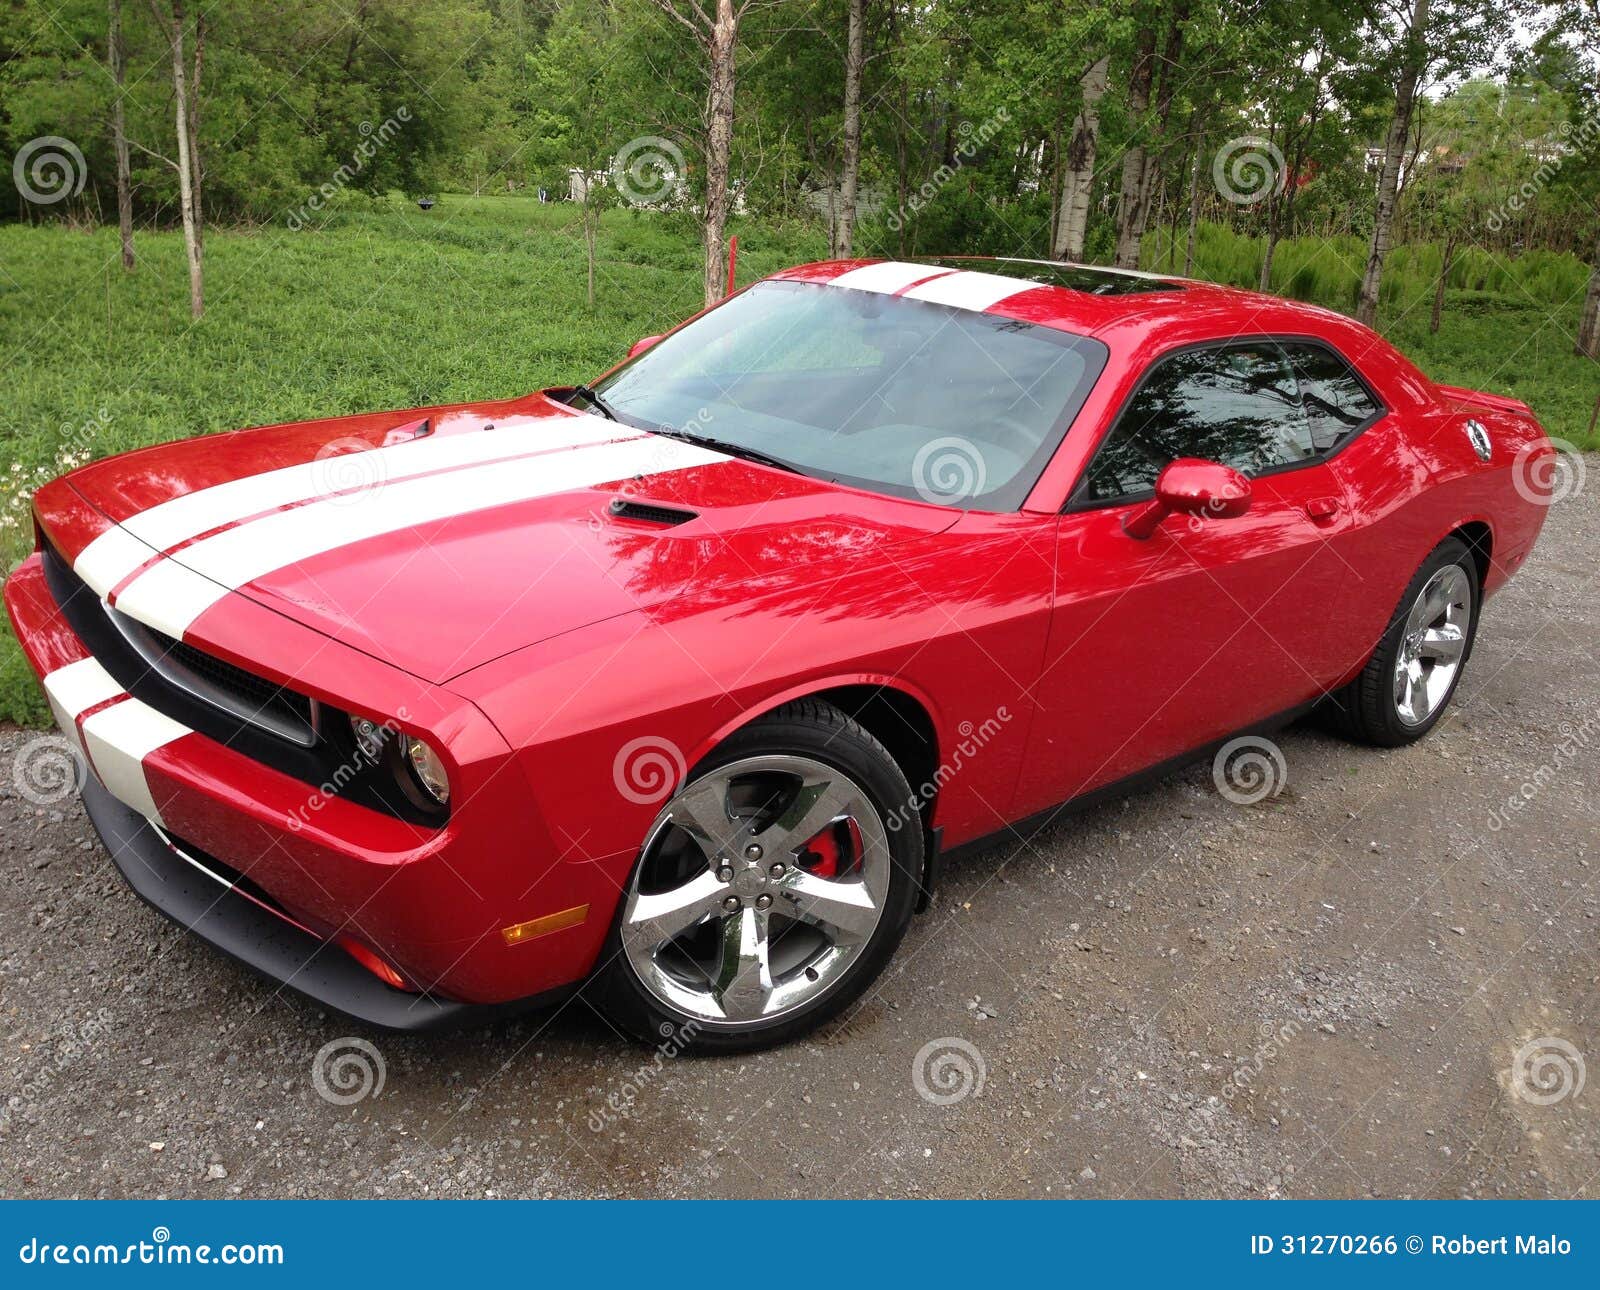 923 Customized Red Car Stock Photos - & Royalty-Free Stock Photos Dreamstime